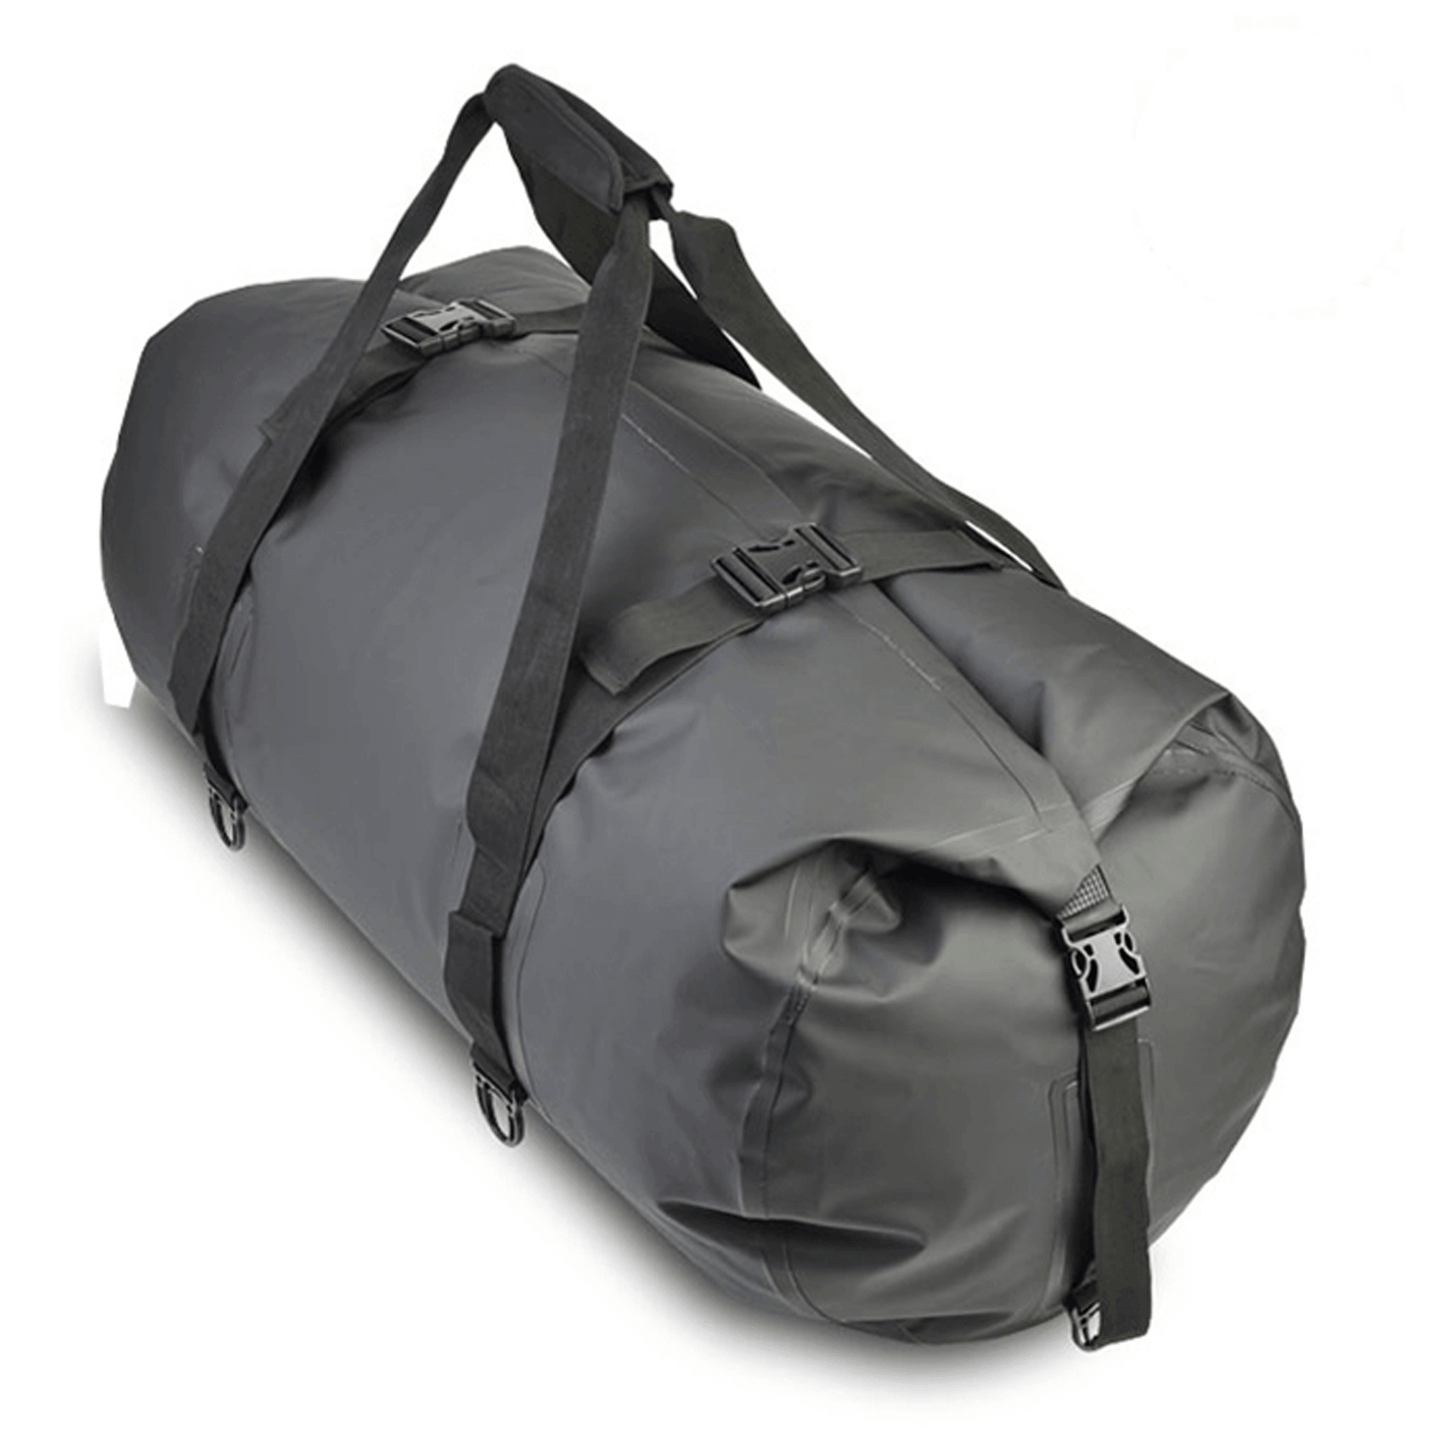 AWOL DIVER X-Large Duffle Bag 886095 Harvest & Extraction 853336007140